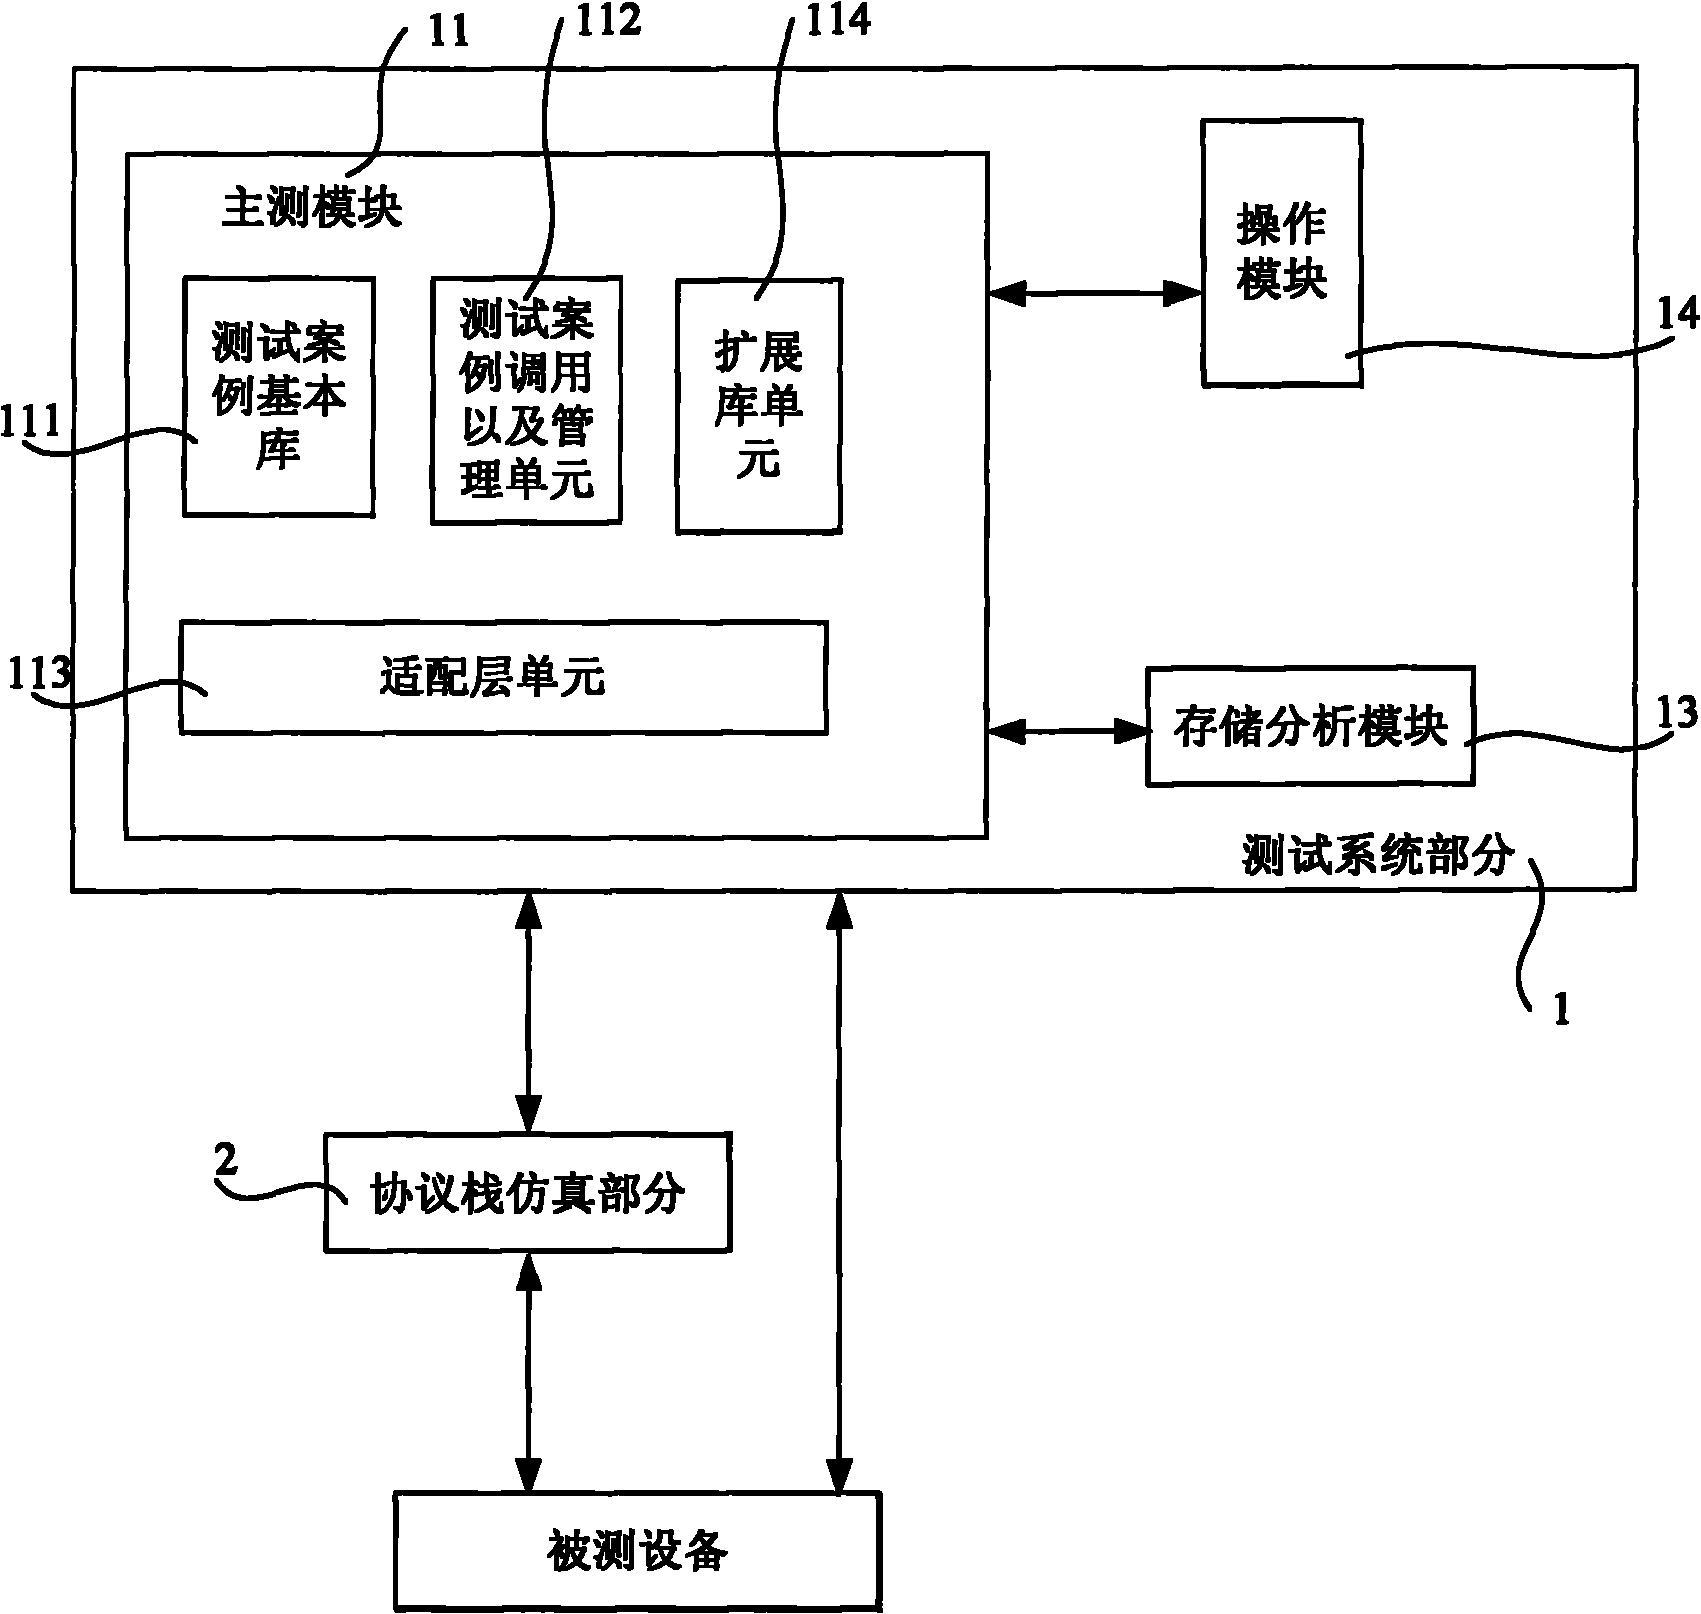 Testing platform for train-ground transmission protocol in train operation control system and construction method thereof